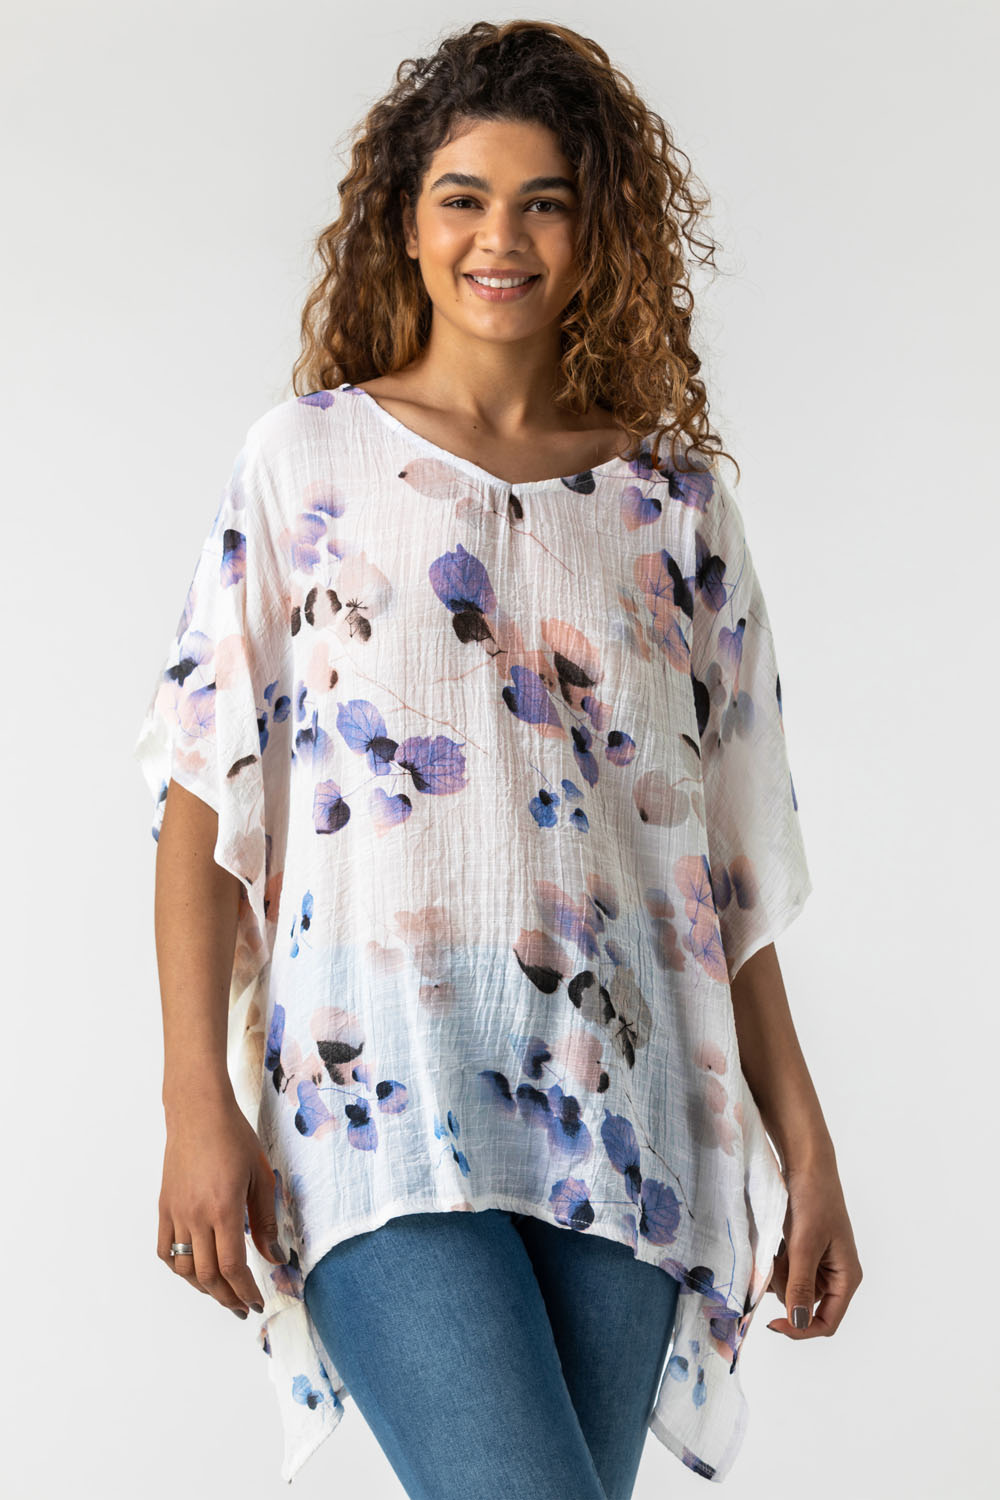 Blue Abstract Floral Print Tunic Top, Image 5 of 5